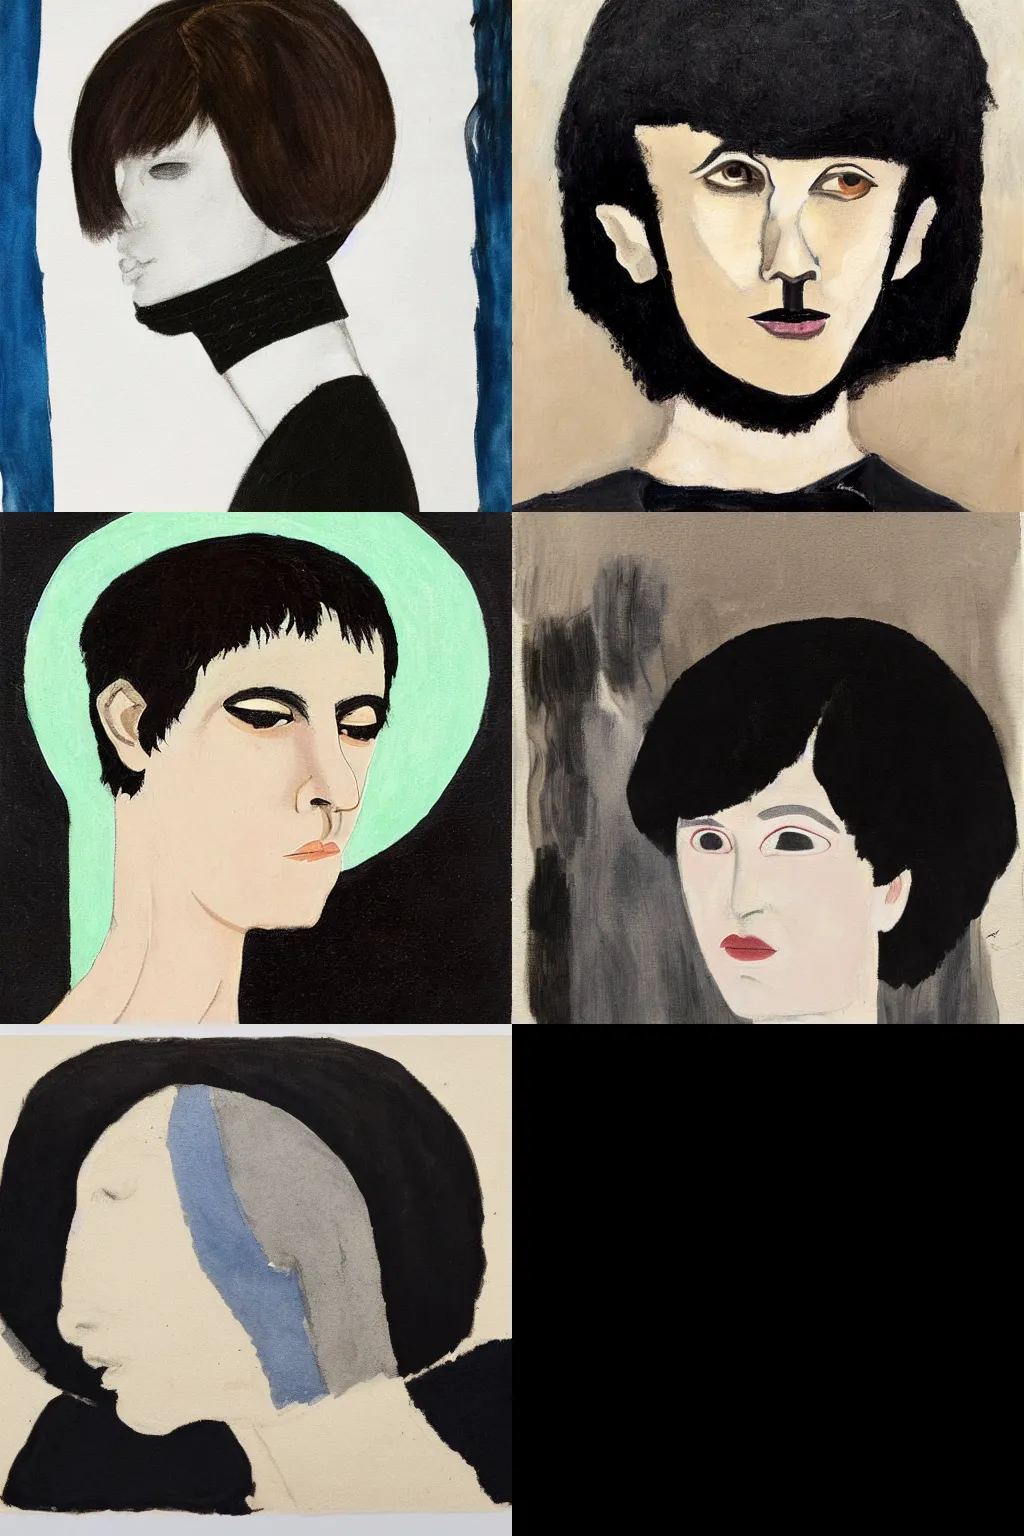 Prompt: a goth portrait painted by etel adnan. her hair is dark brown and cut into a short, messy pixie cut. she has a slightly rounded face, with a pointed chin, large entirely - black eyes, and a small nose. she is wearing a black tank top, a black leather jacket, a black knee - length skirt, and a black choker.